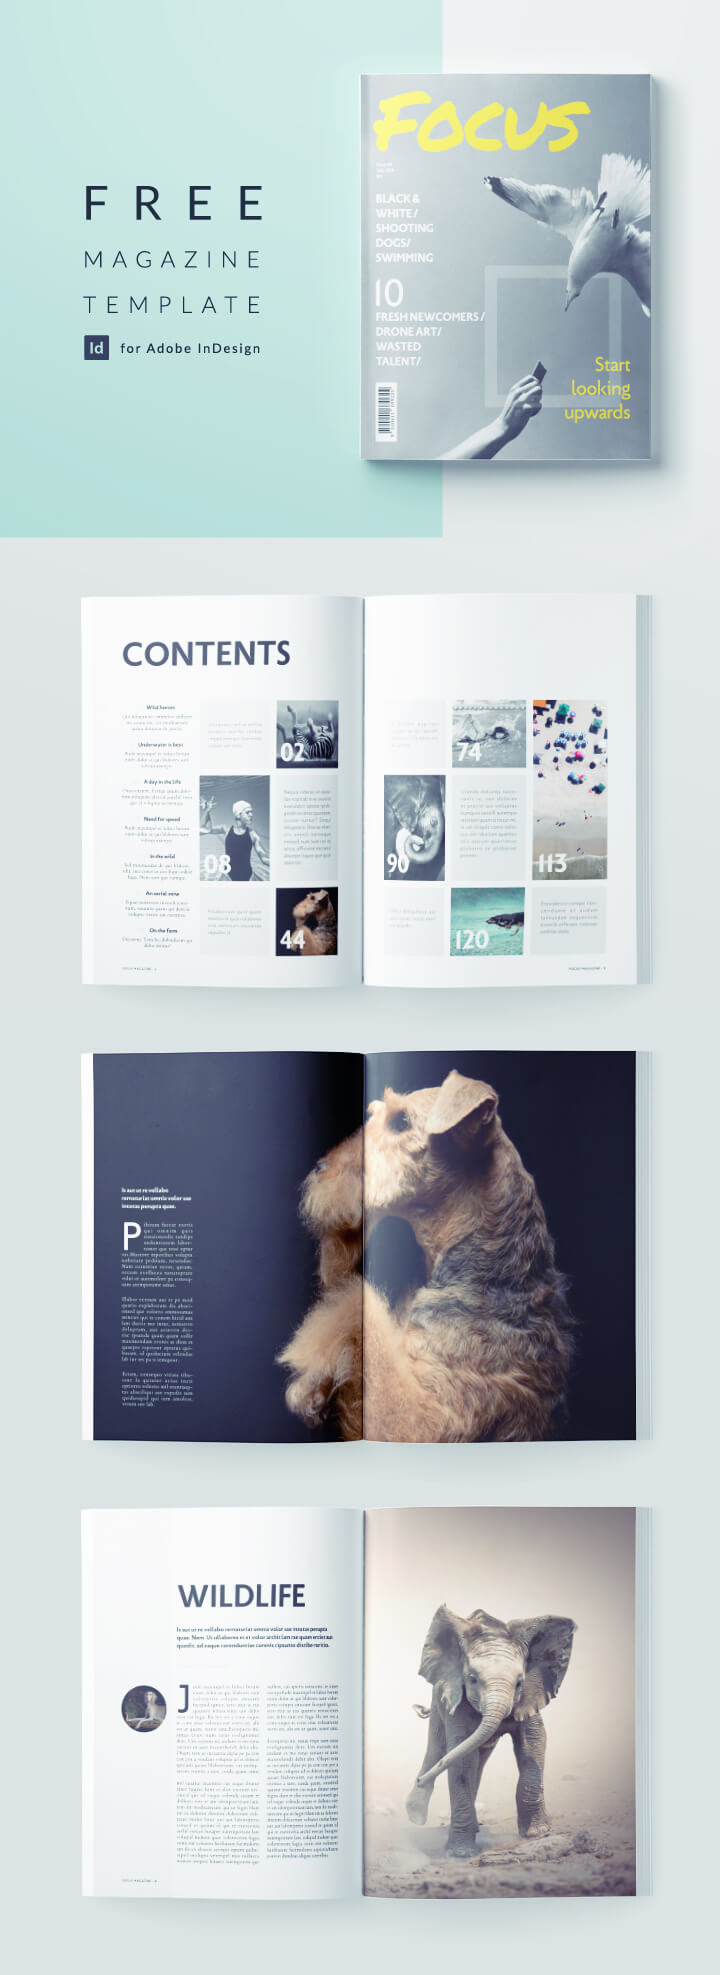 free indesign magazine template - download this professionally designed template for an indesign photography magazine